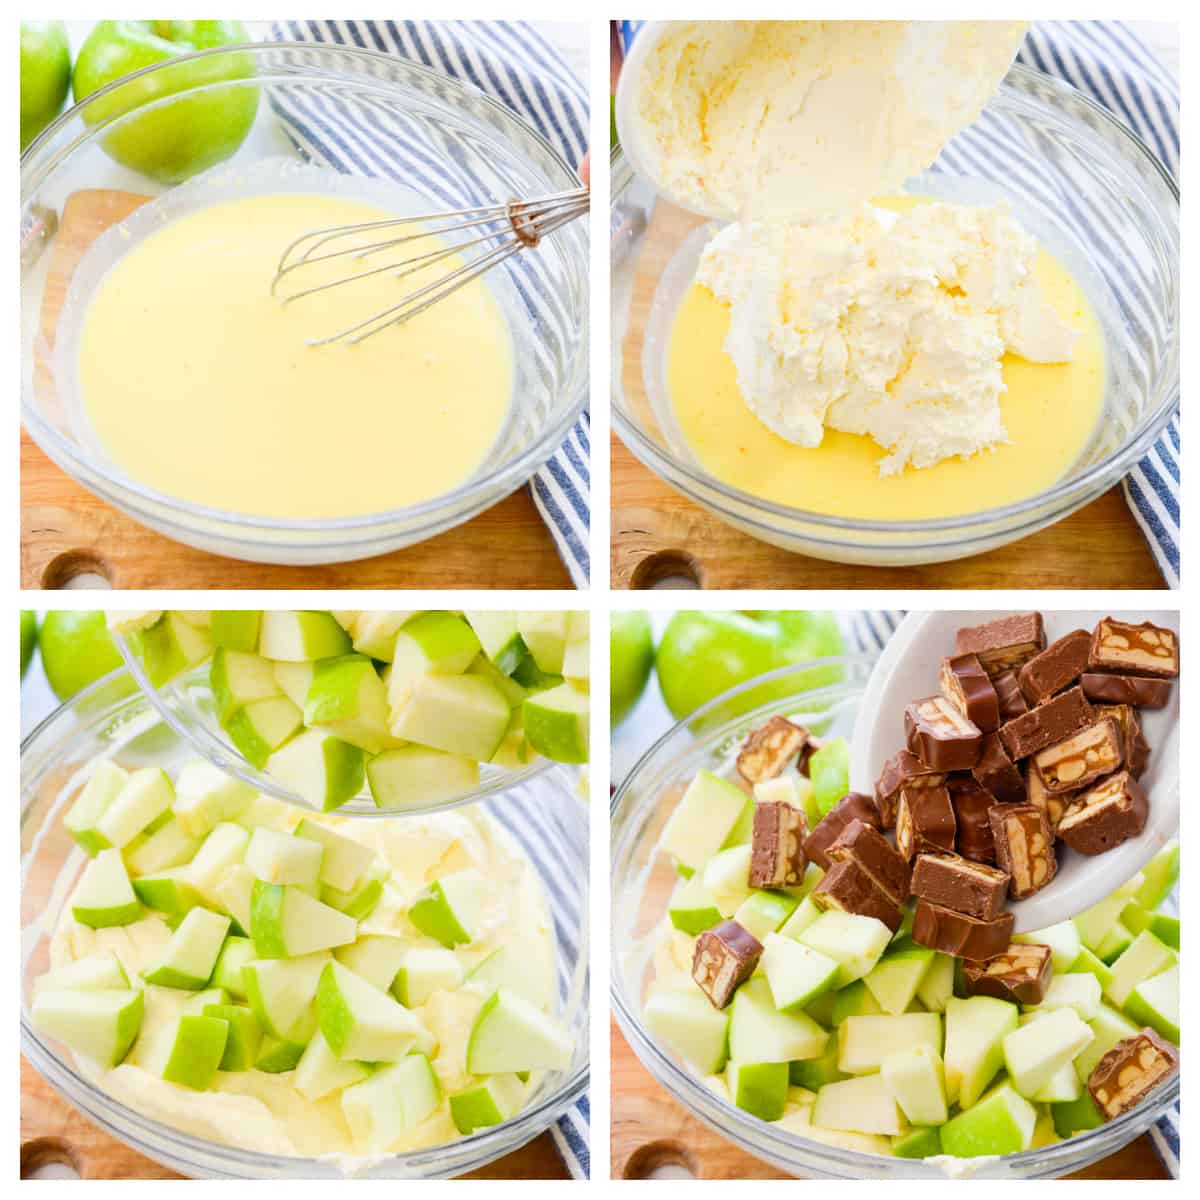 Collage showing how to make snicker salad.